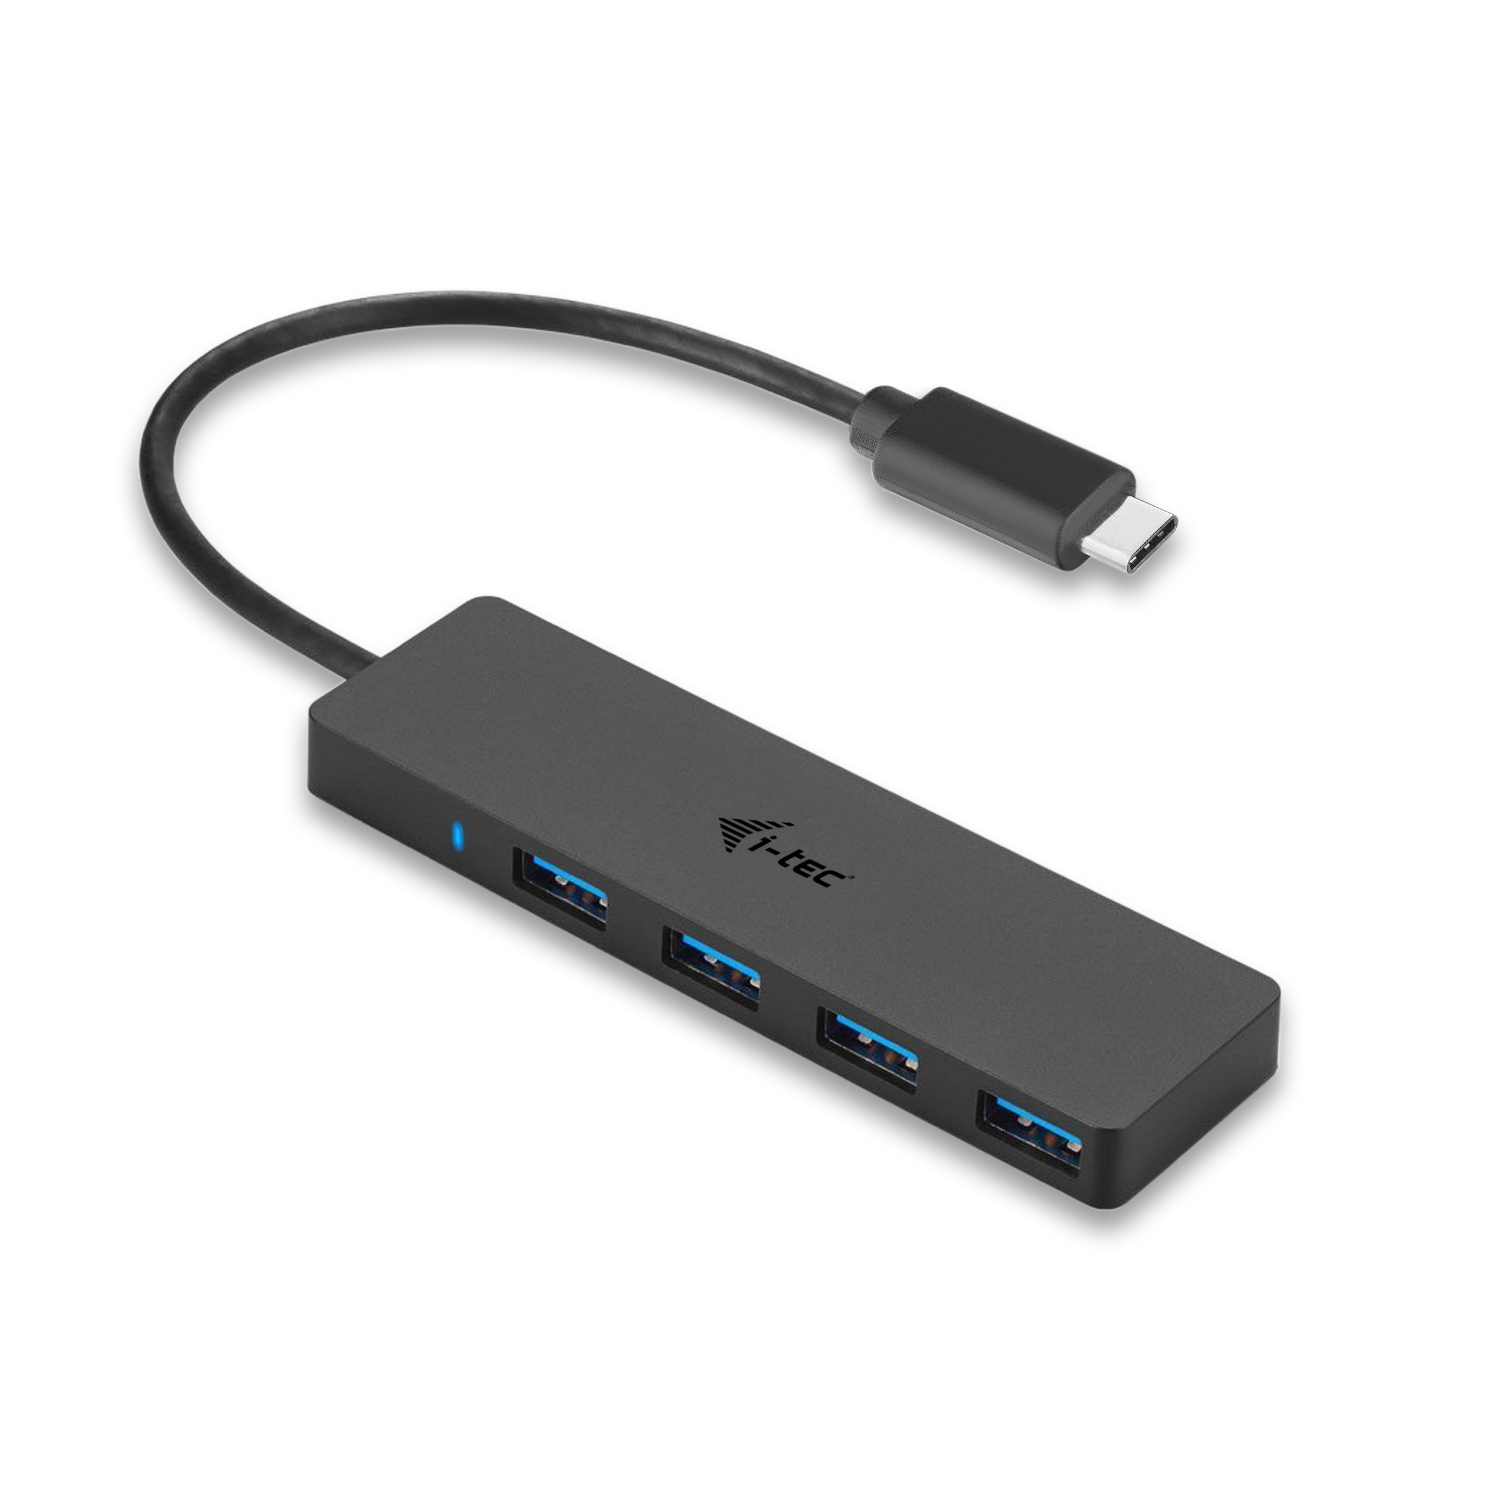  USB C Slim Passive HUB 4 Port without power adapter for Notebook Tablet PC supports Win Mac OS compatible with Thunderbolt